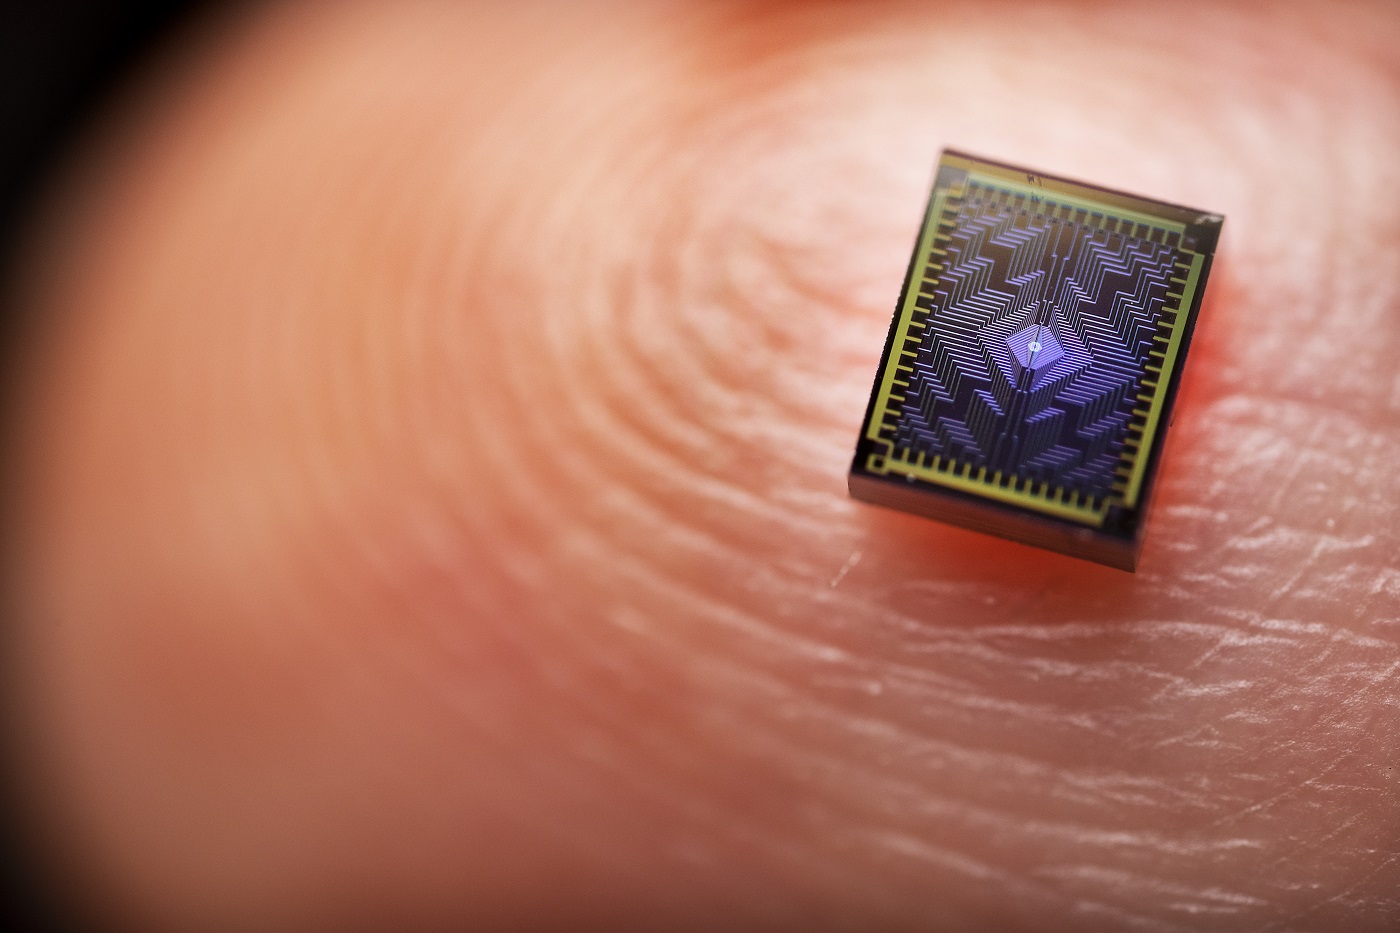 A photo shows one of Intel's Tunnel Falls chips on a human finger to display its scale